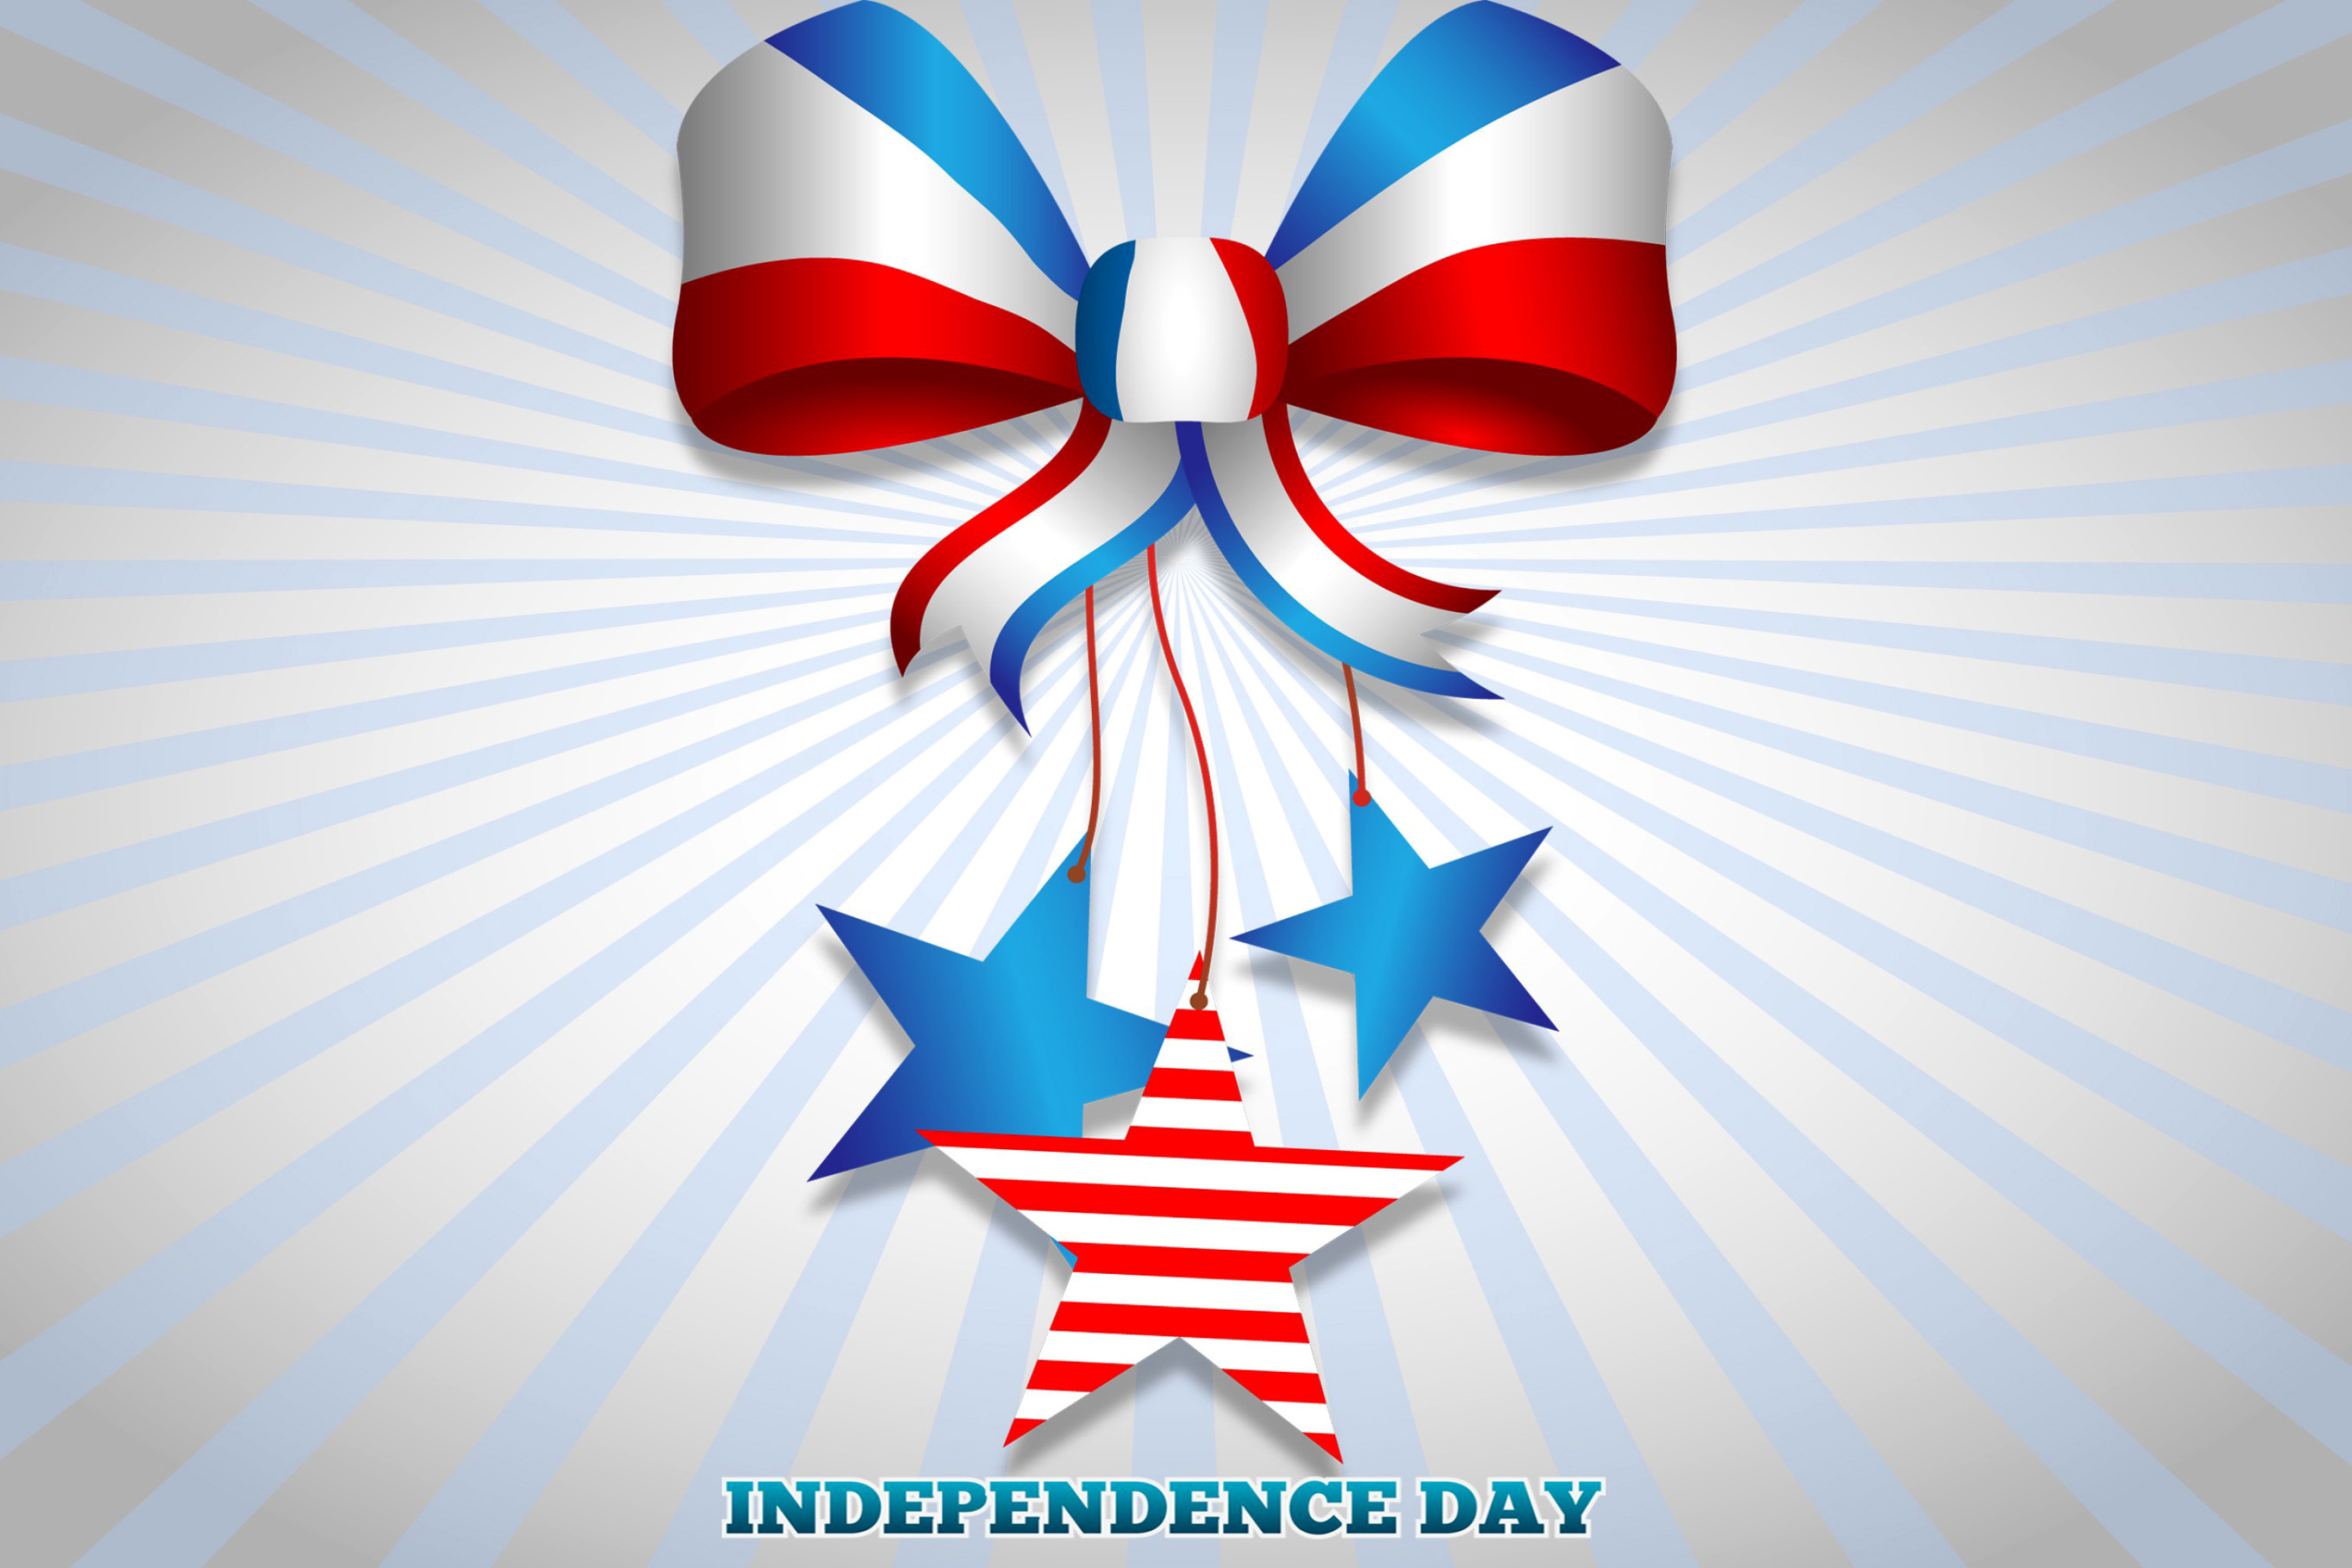 Das United states america Idependence day 4th july Wallpaper 2880x1920